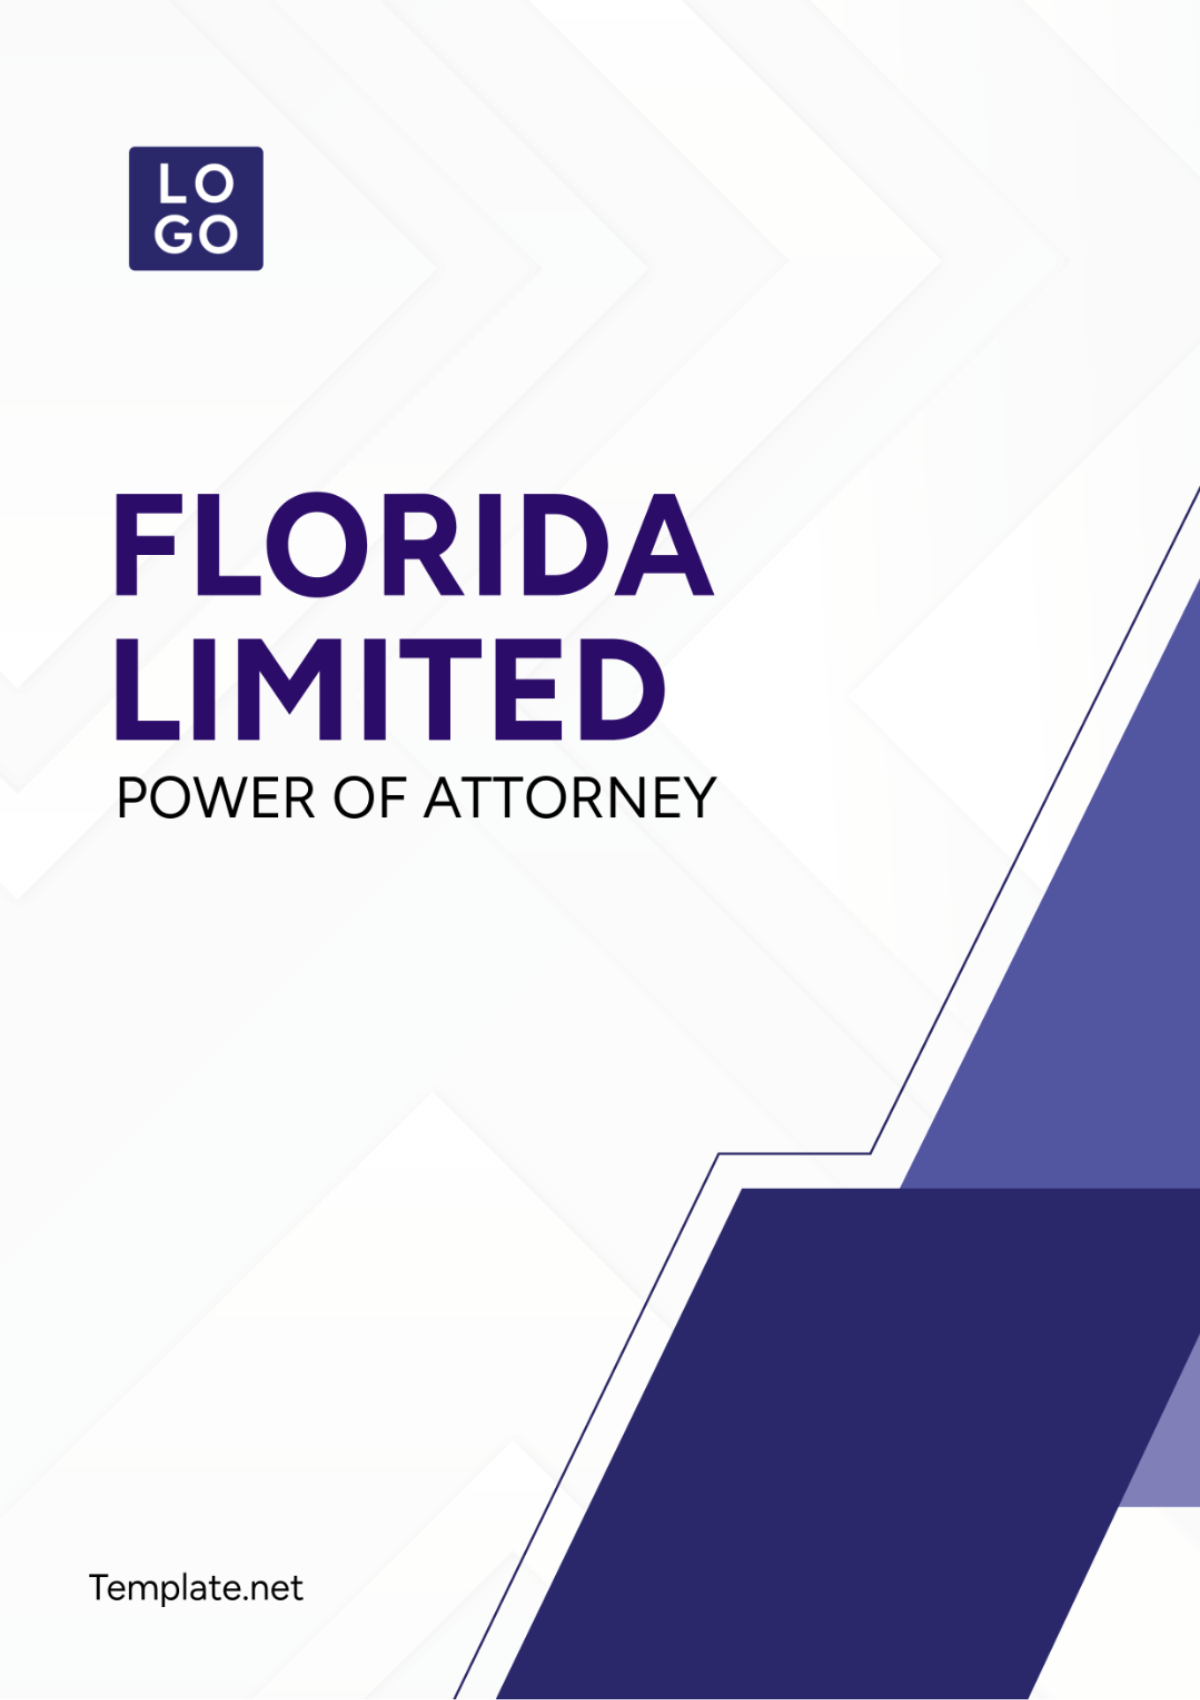 Florida Limited Power of Attorney Template